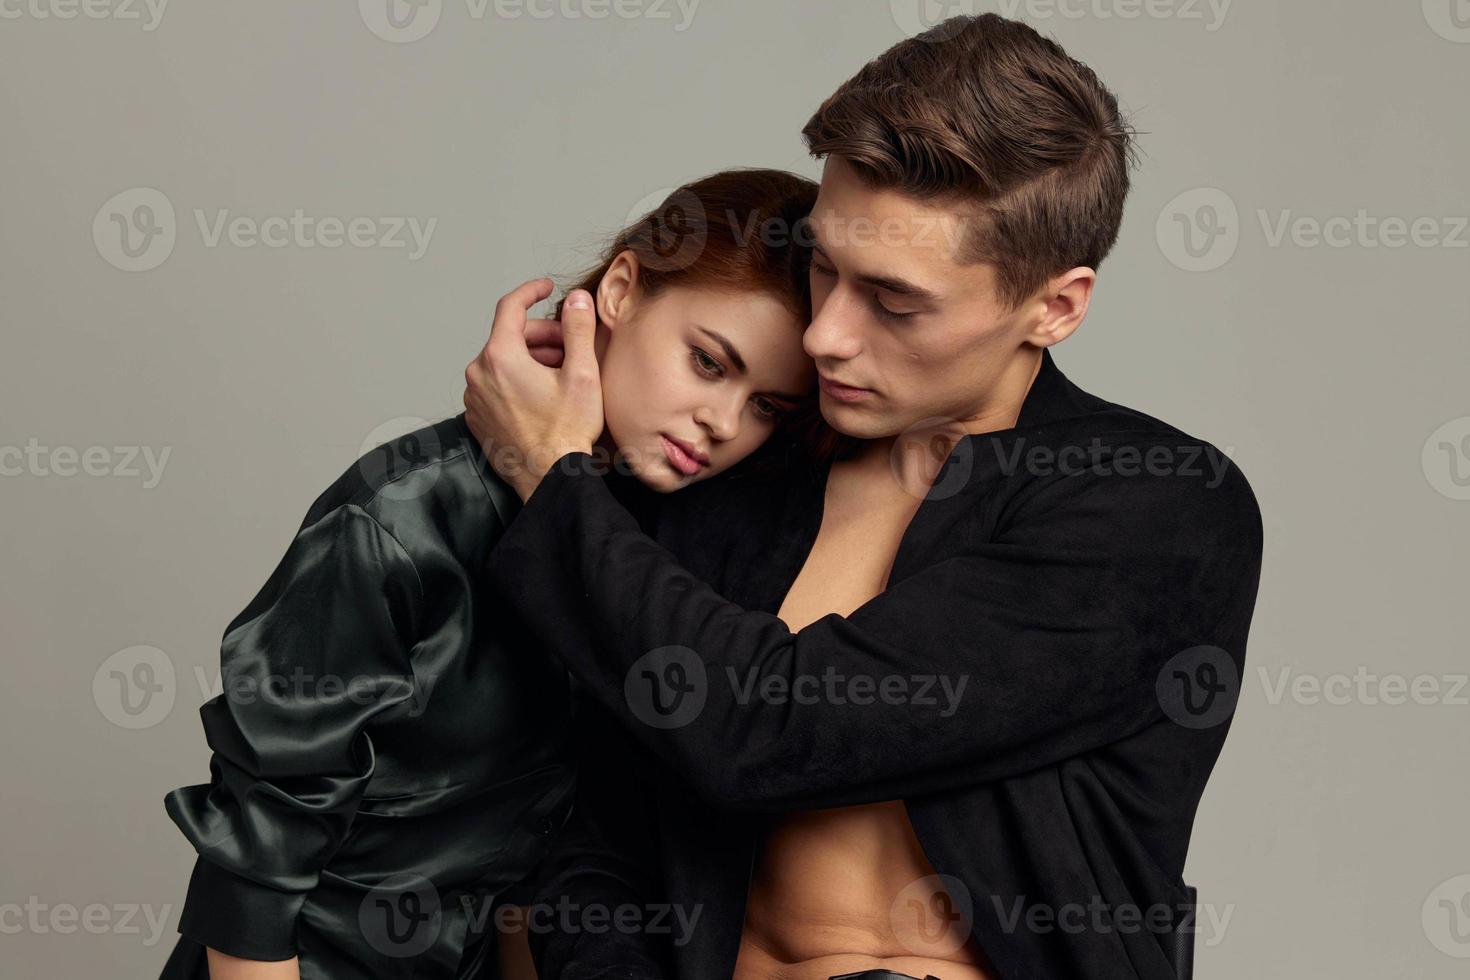 Man and woman are standing side by side hugs intimacy tenderness relationship romantic photo